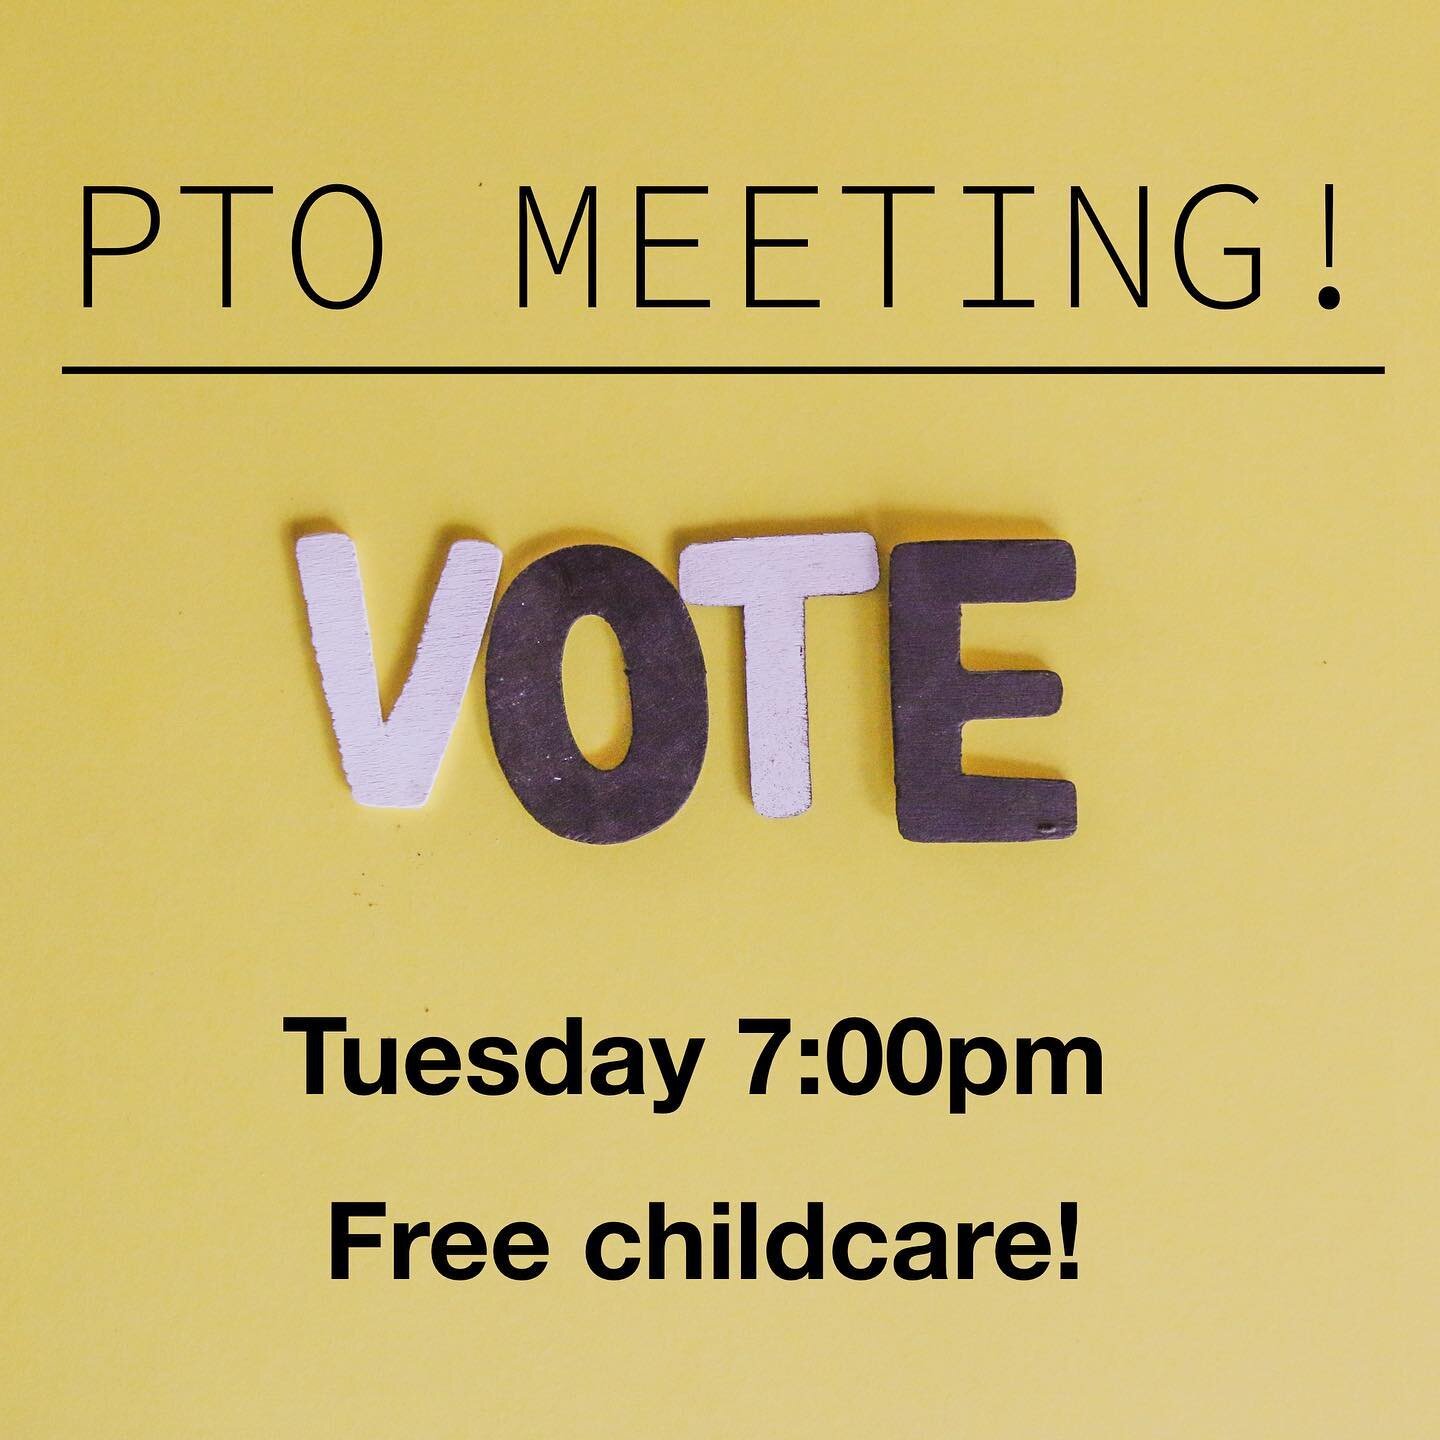 Please join us at the PTO meeting on Tuesday at 7:00pm in the LRC! Free childcare provided! We will be voting to approve the funds for the outdoor improvement project. According to the PTO bylaws, voting must take place in person by paid members of t